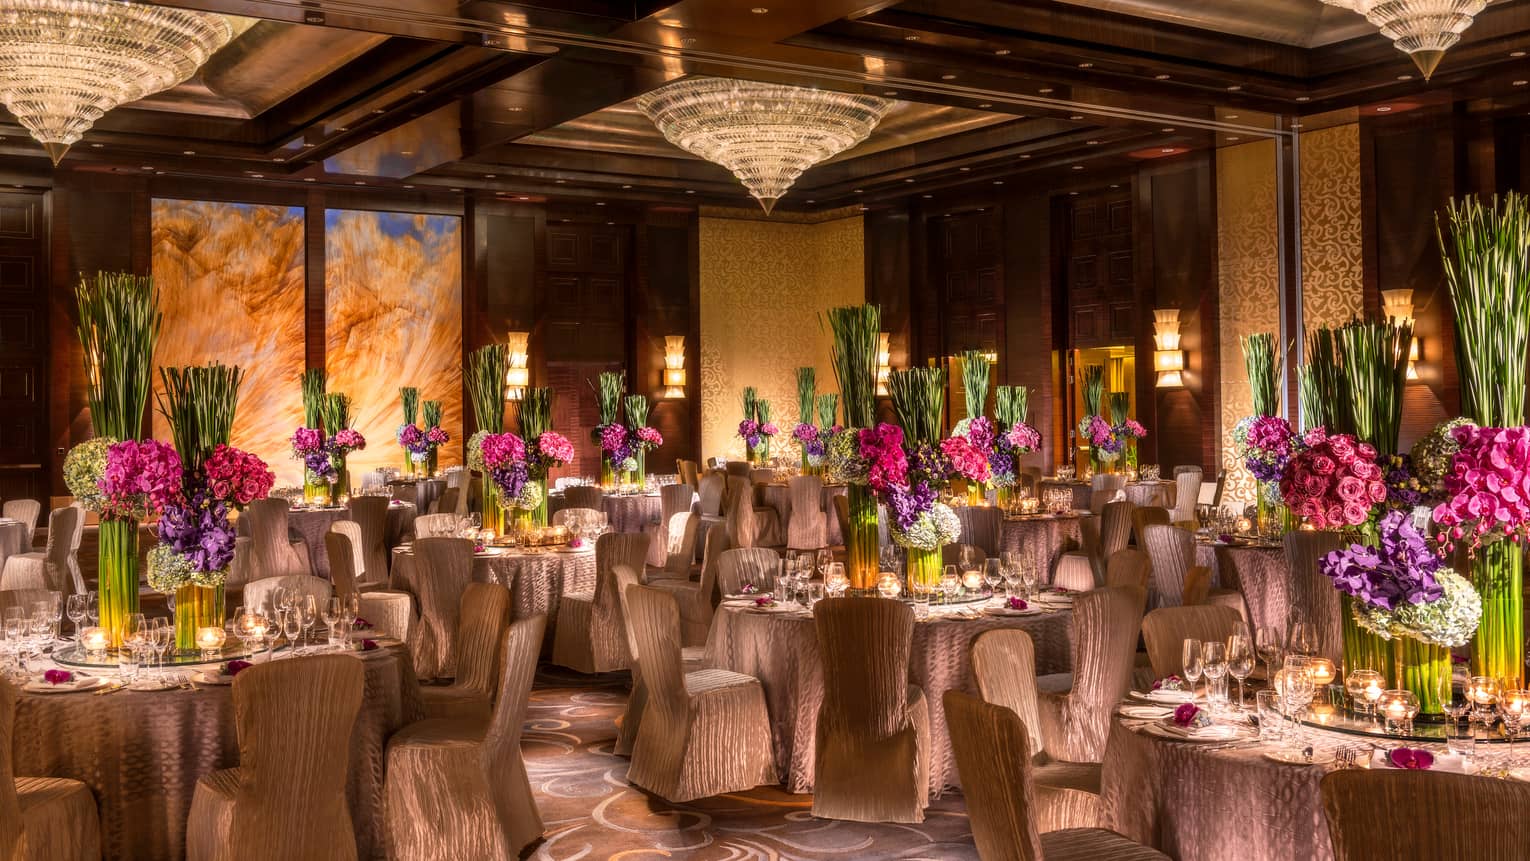 Imperial Ballroom wedding reception with fabric-covered chairs, floral centrepieces, crystal chandeliers